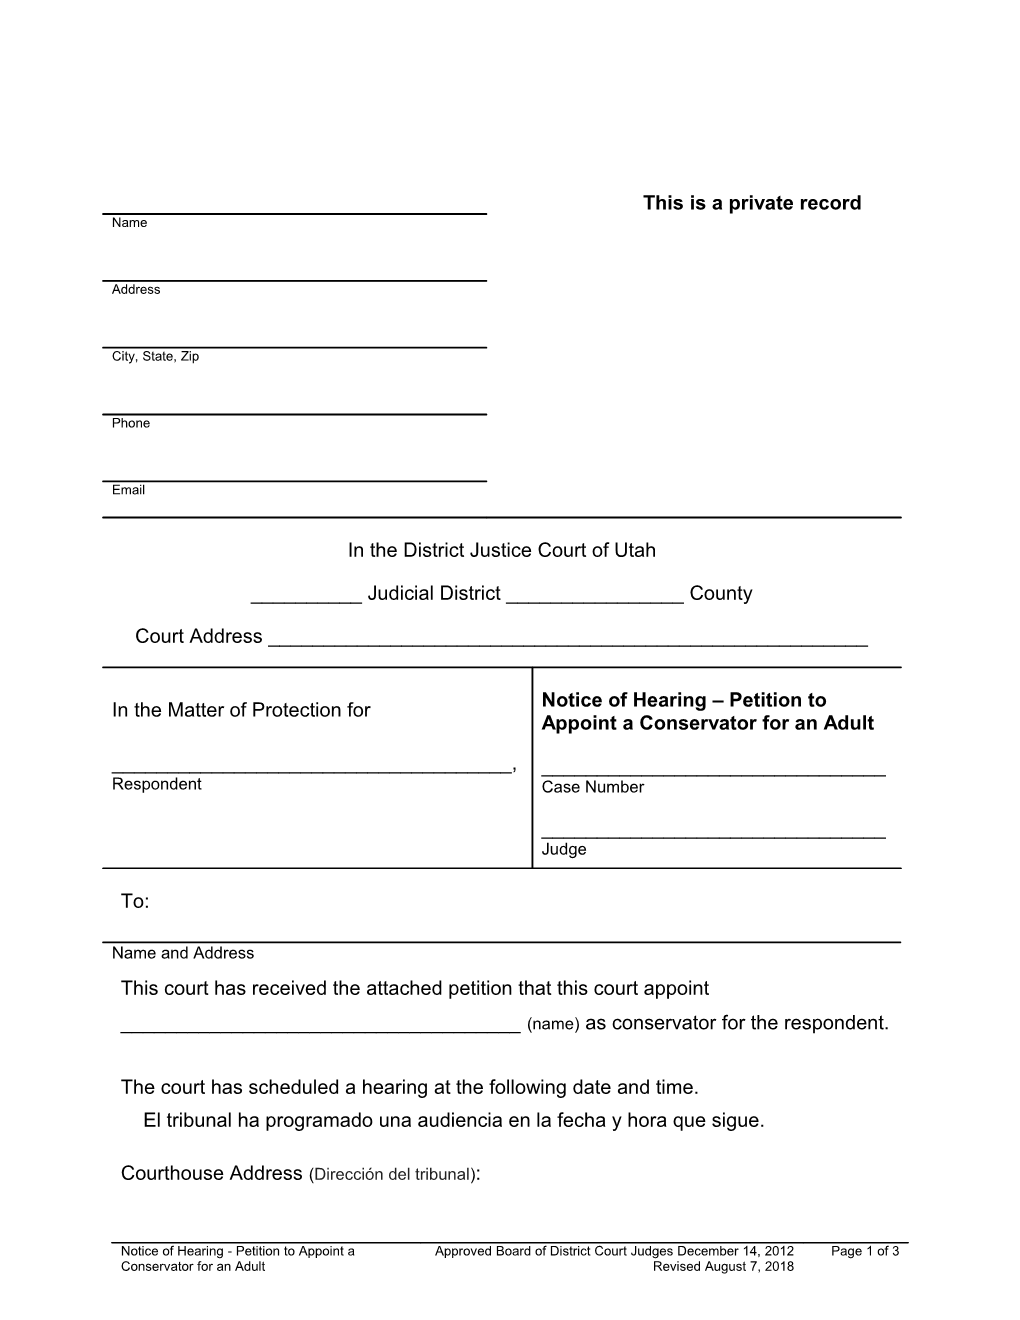 Notice of Hearing Petition to Appoint a Conservator for an Adult